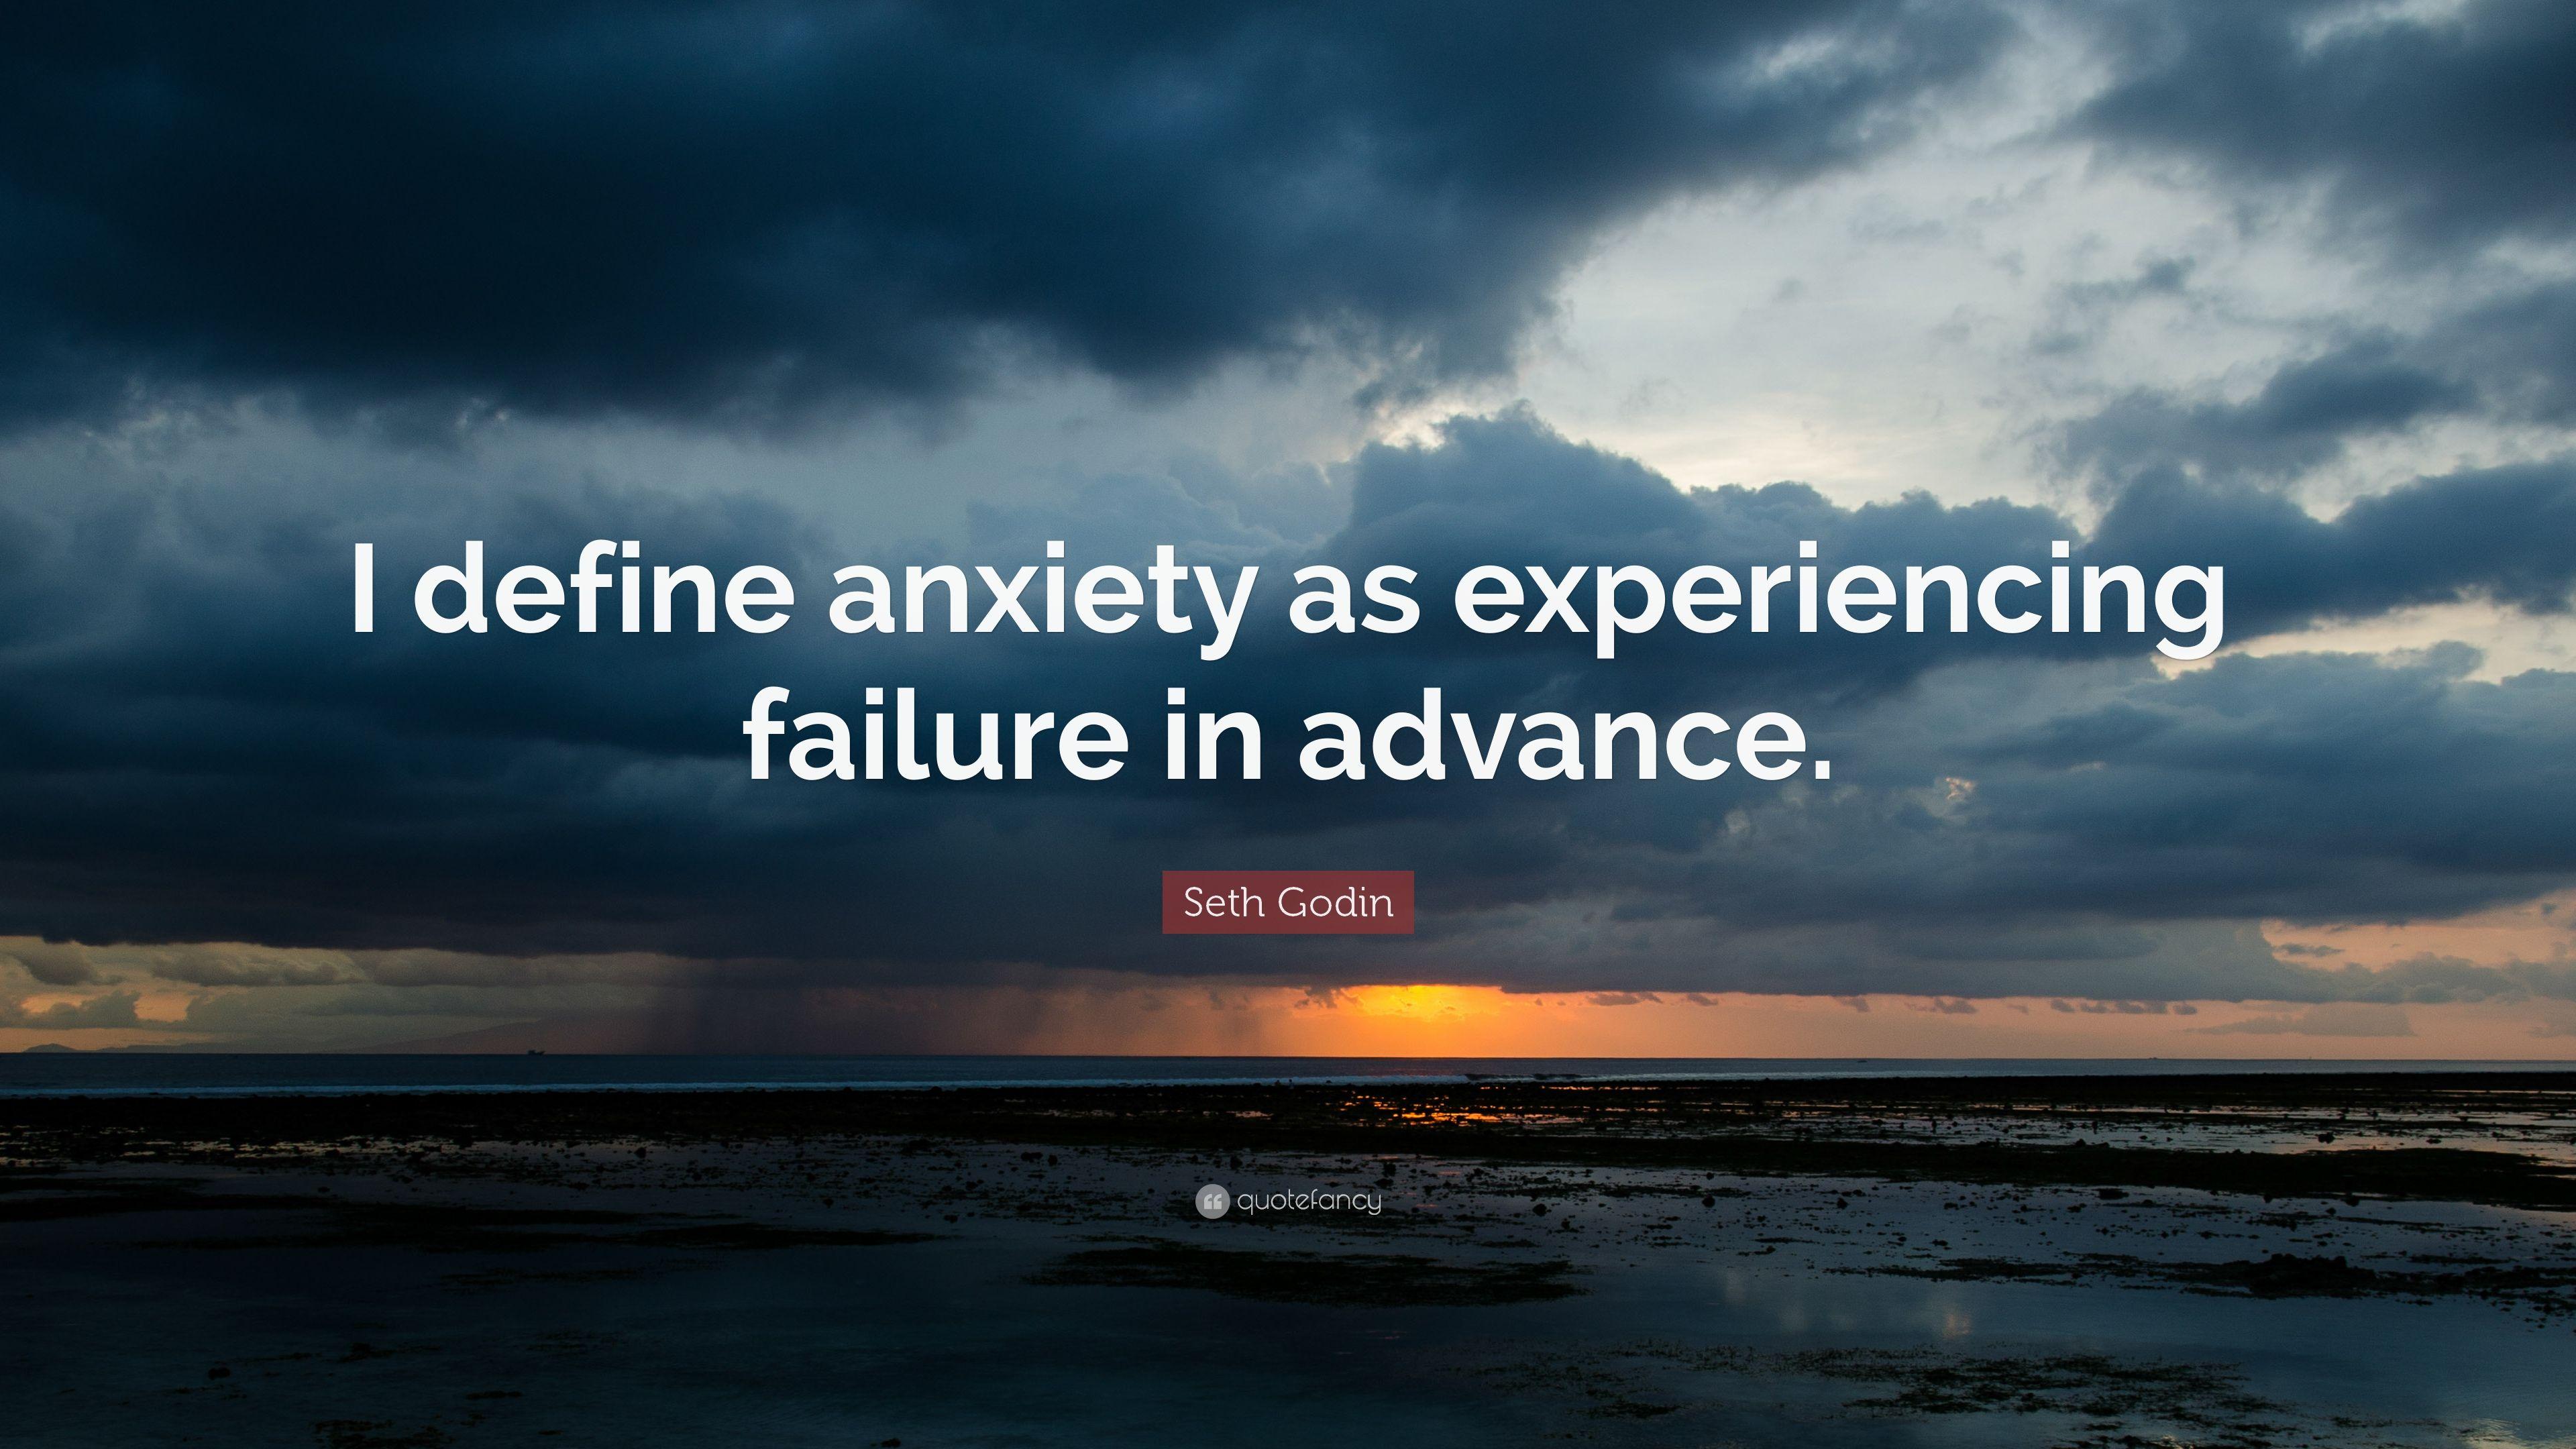 Seth Godin Quote: “I define anxiety as experiencing failure